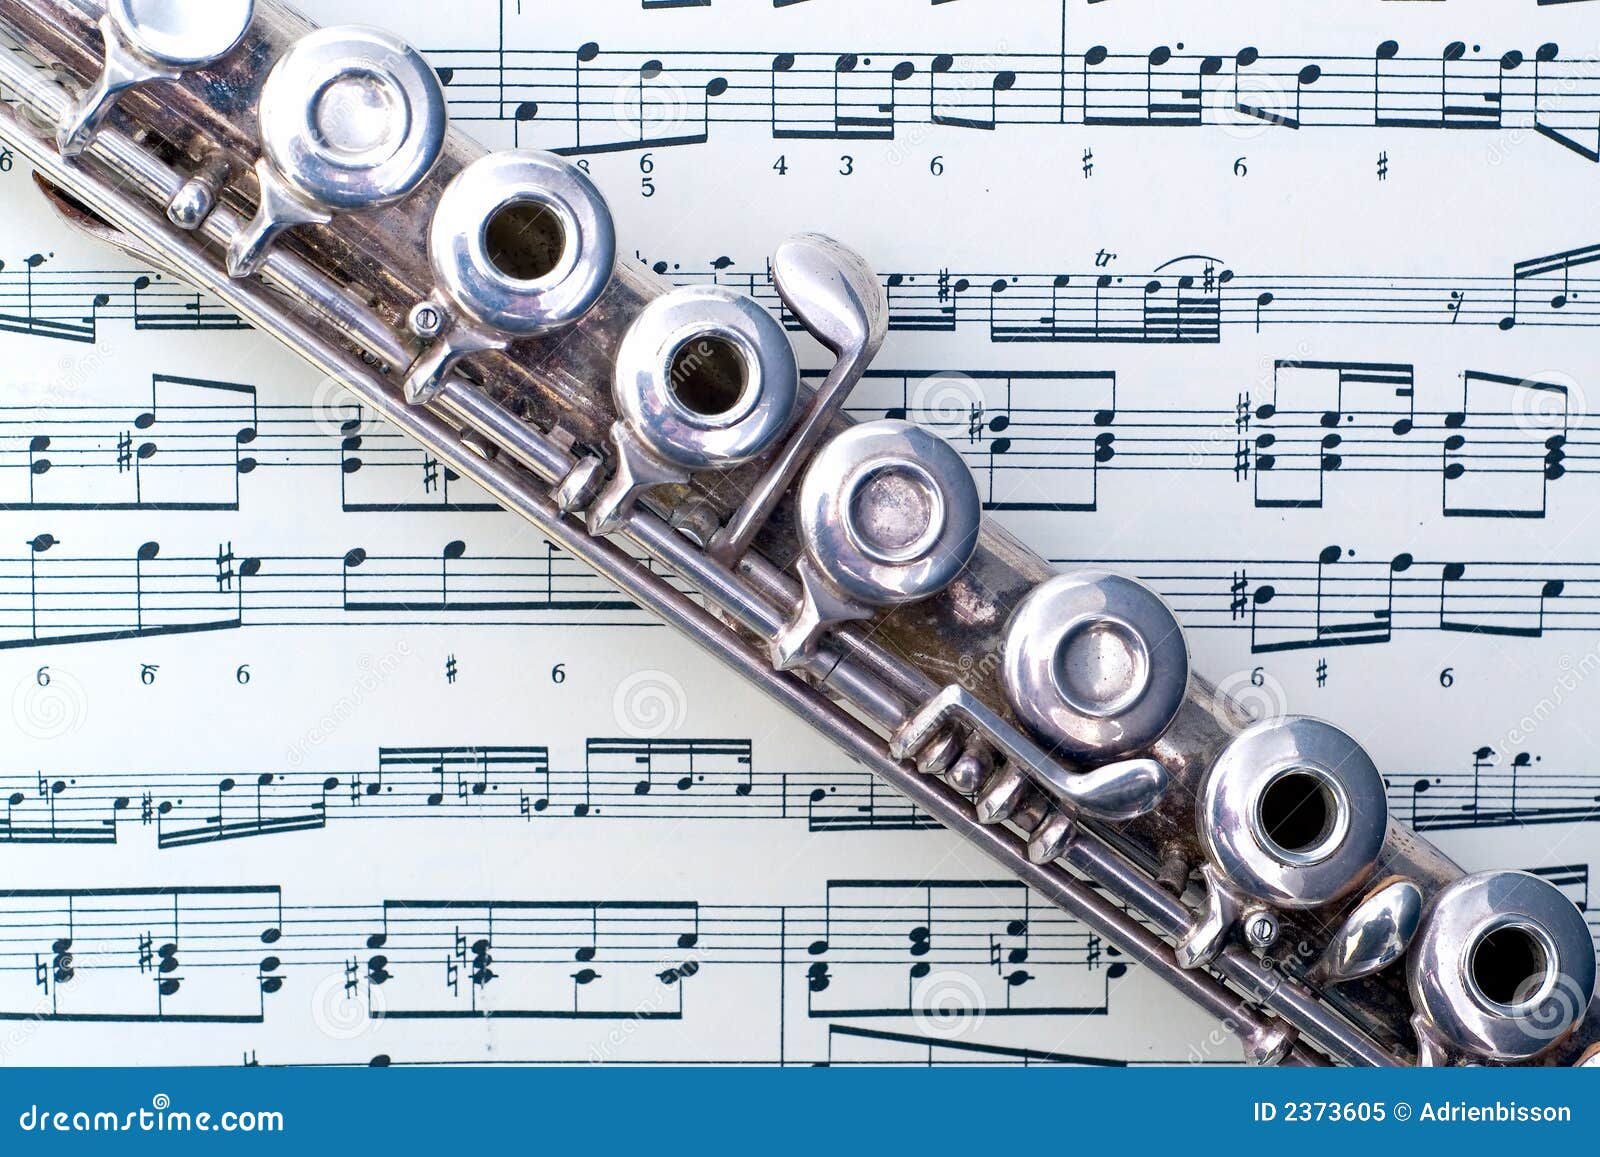 A flute on sheet music stock image. Image of sound, artistry - 2373605